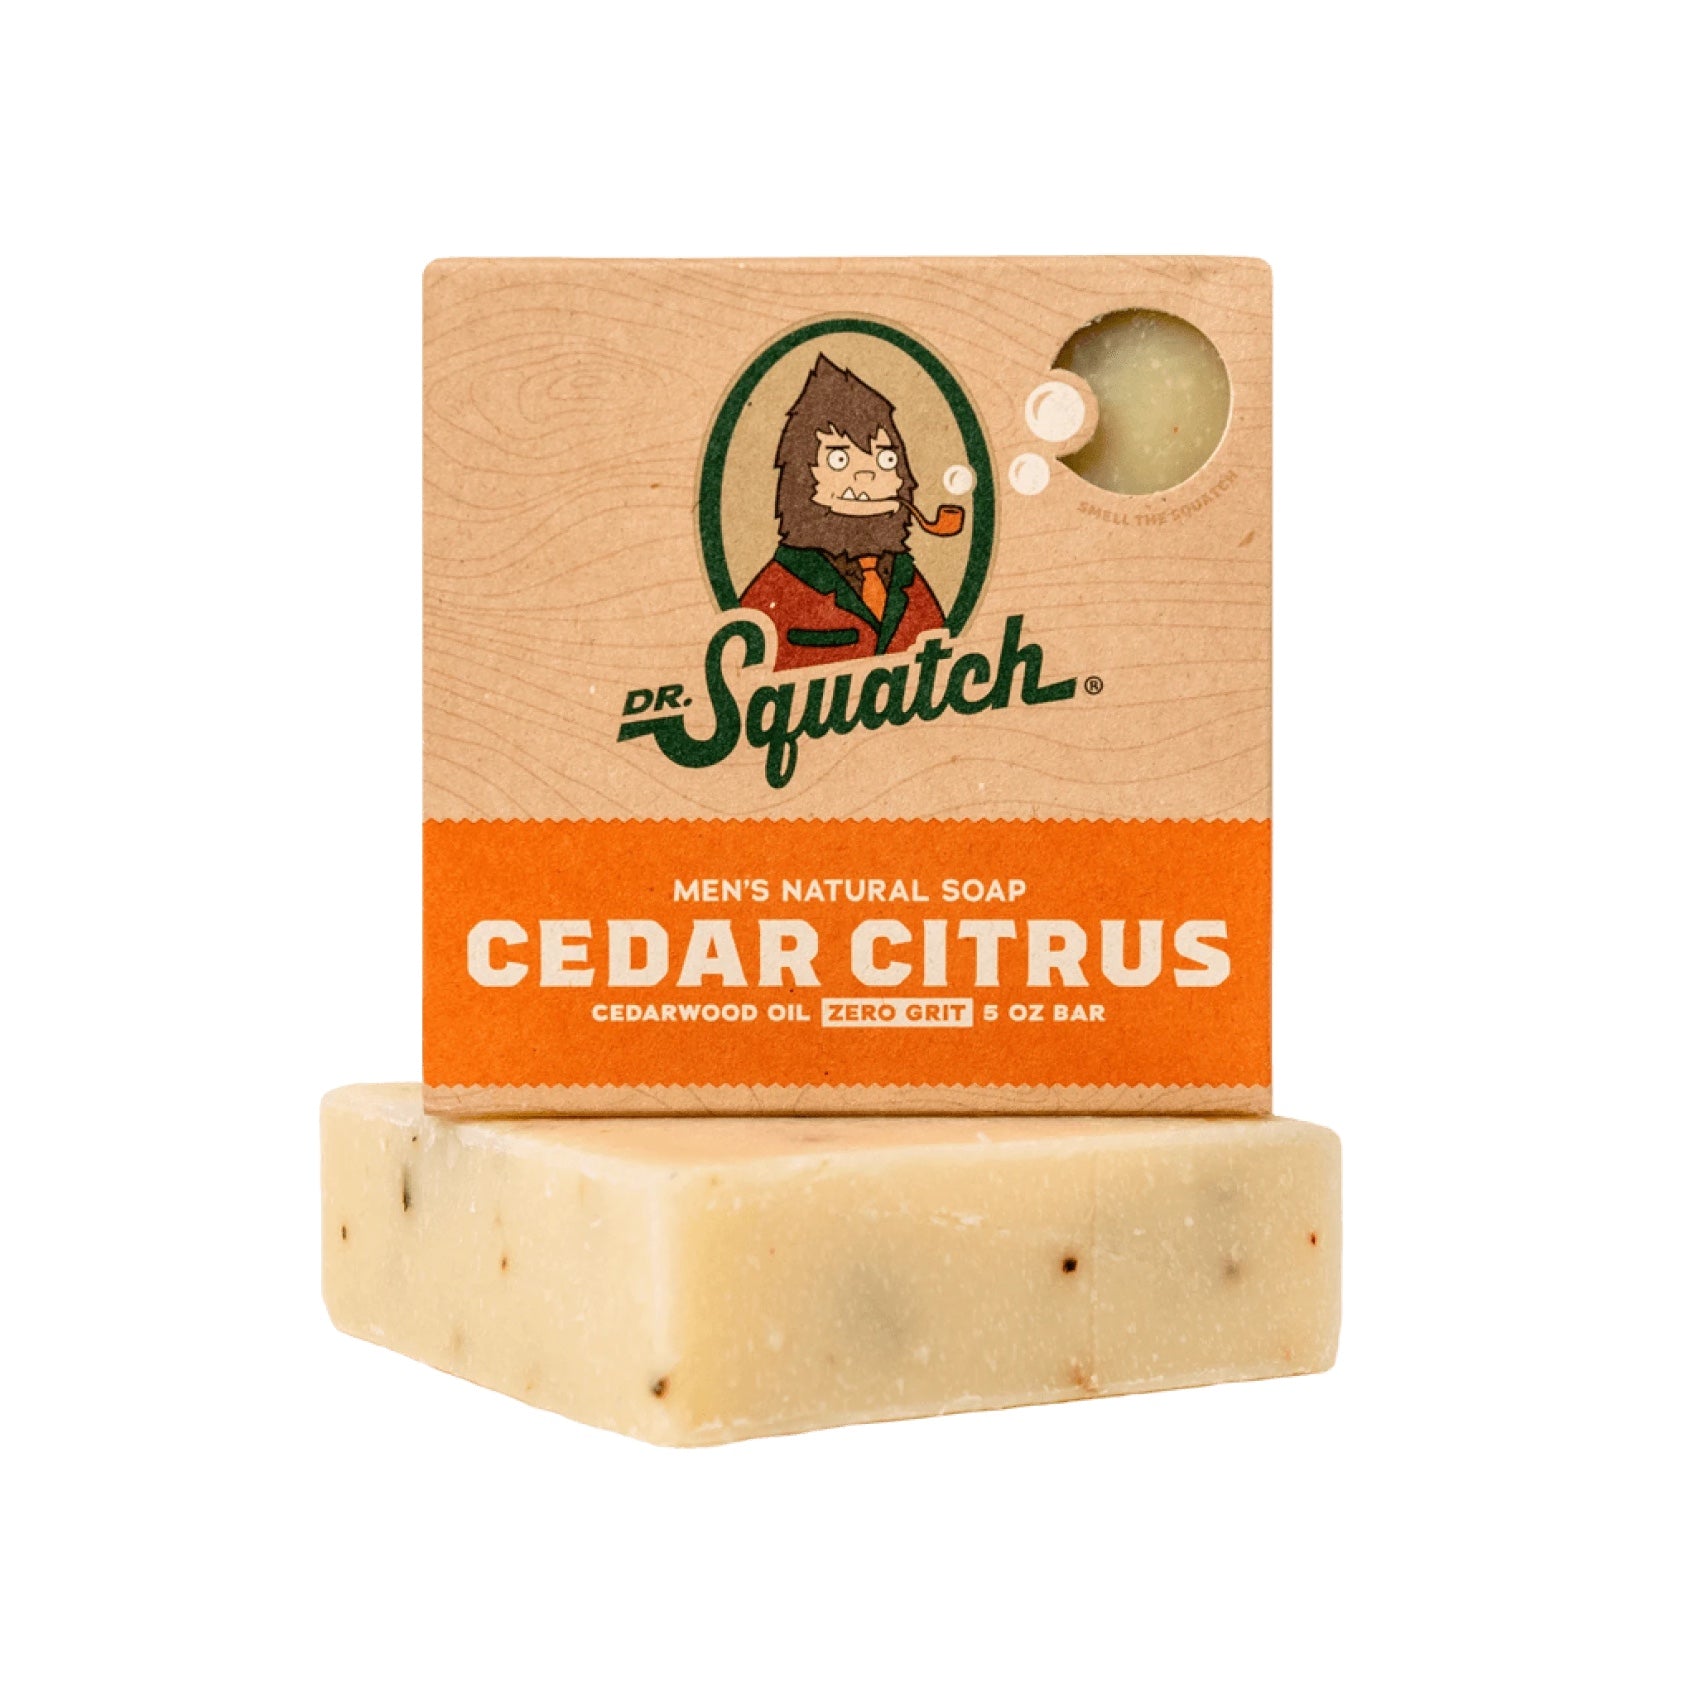 Dr. Squatch - 🌳 NEW SOAP 🌳 Fortified with Birch Bark and Pumice Powder,  this bar soap has a medium-intensity scrub that's gentle but thorough, and  will leave you feeling smooth and